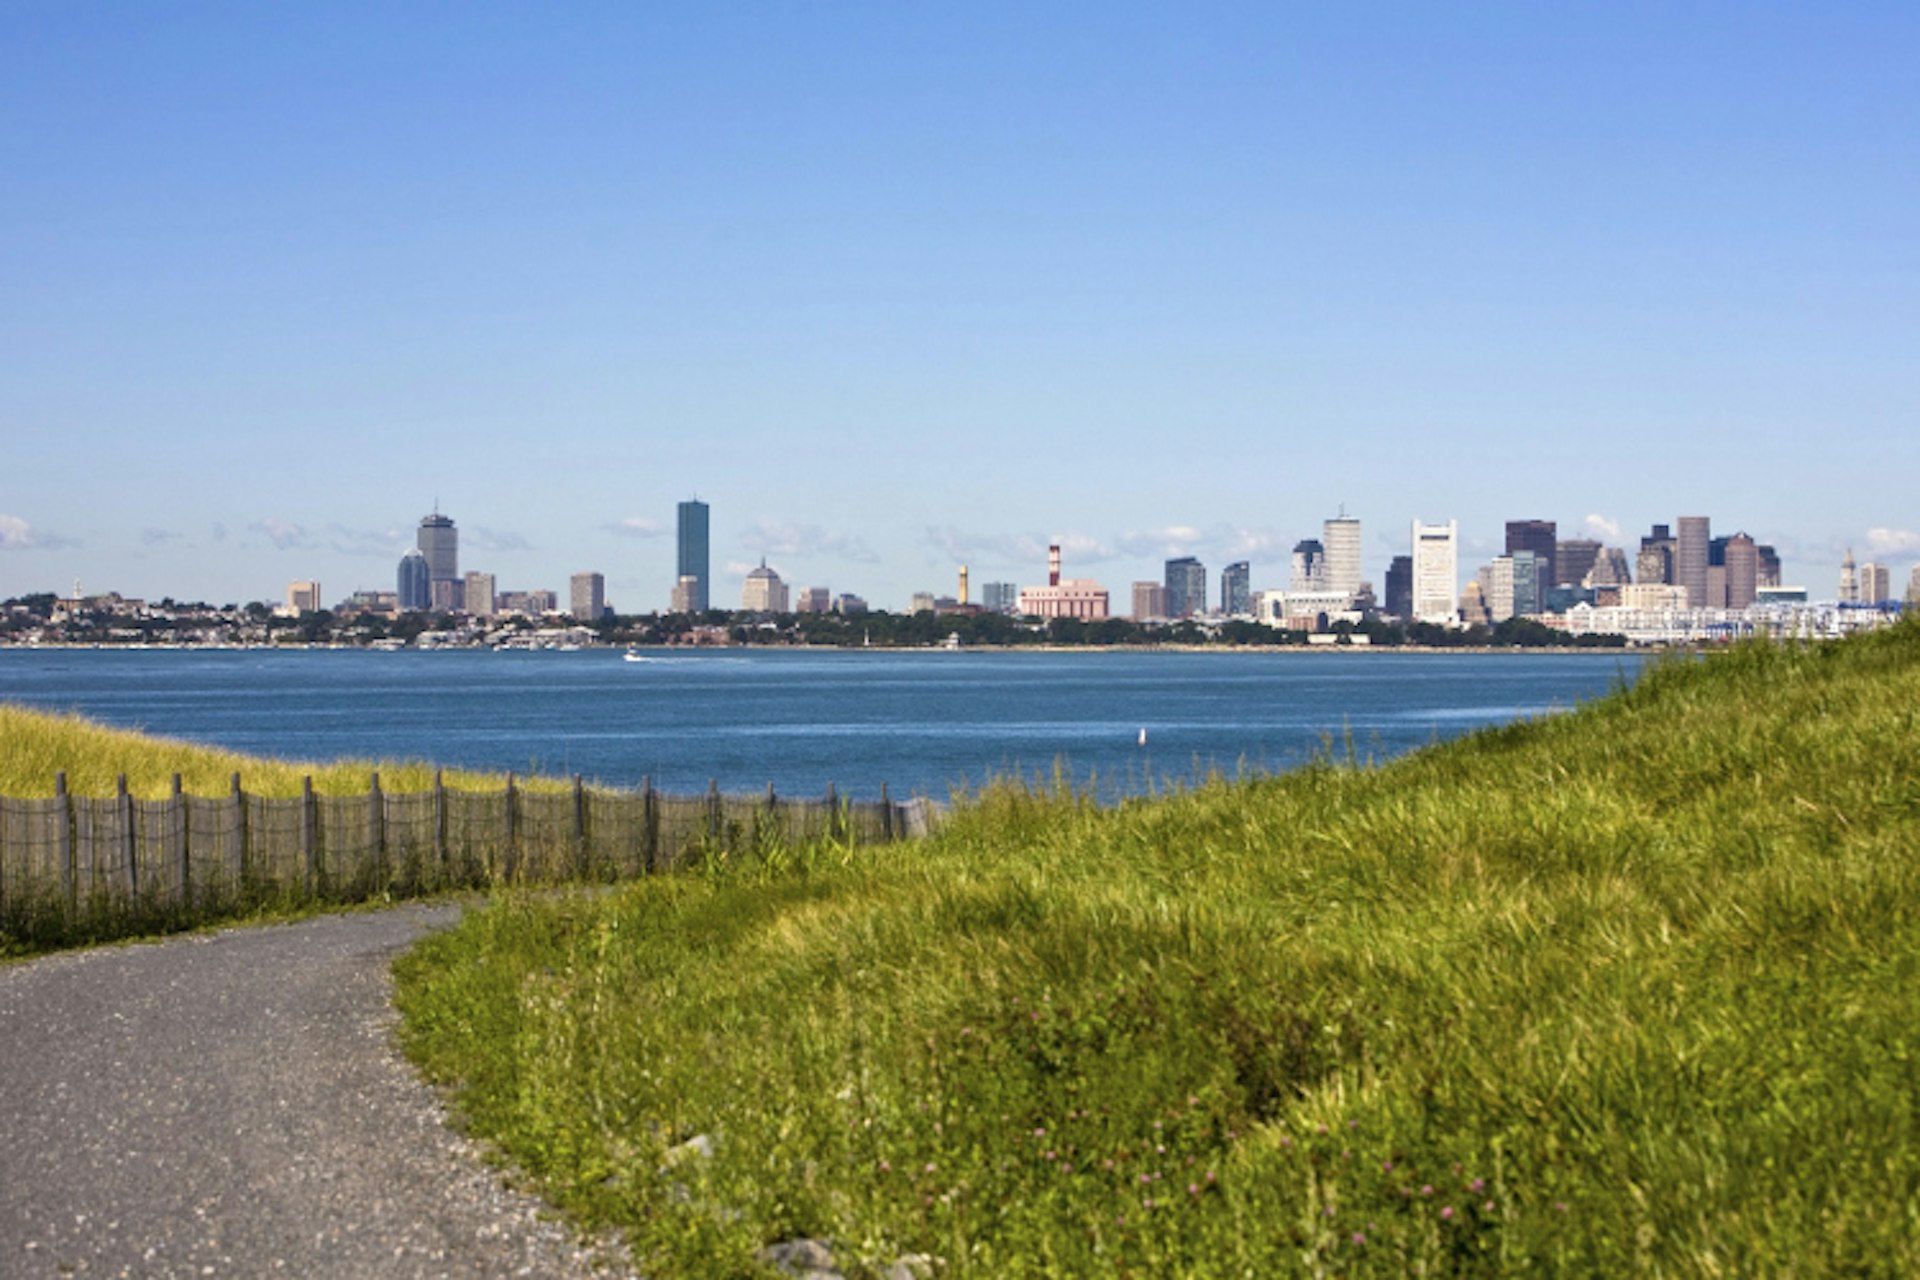 Trails galore to explore on the lovely Boston Harbor Islands. Image by Amy Riley / iStock / Getty Images 